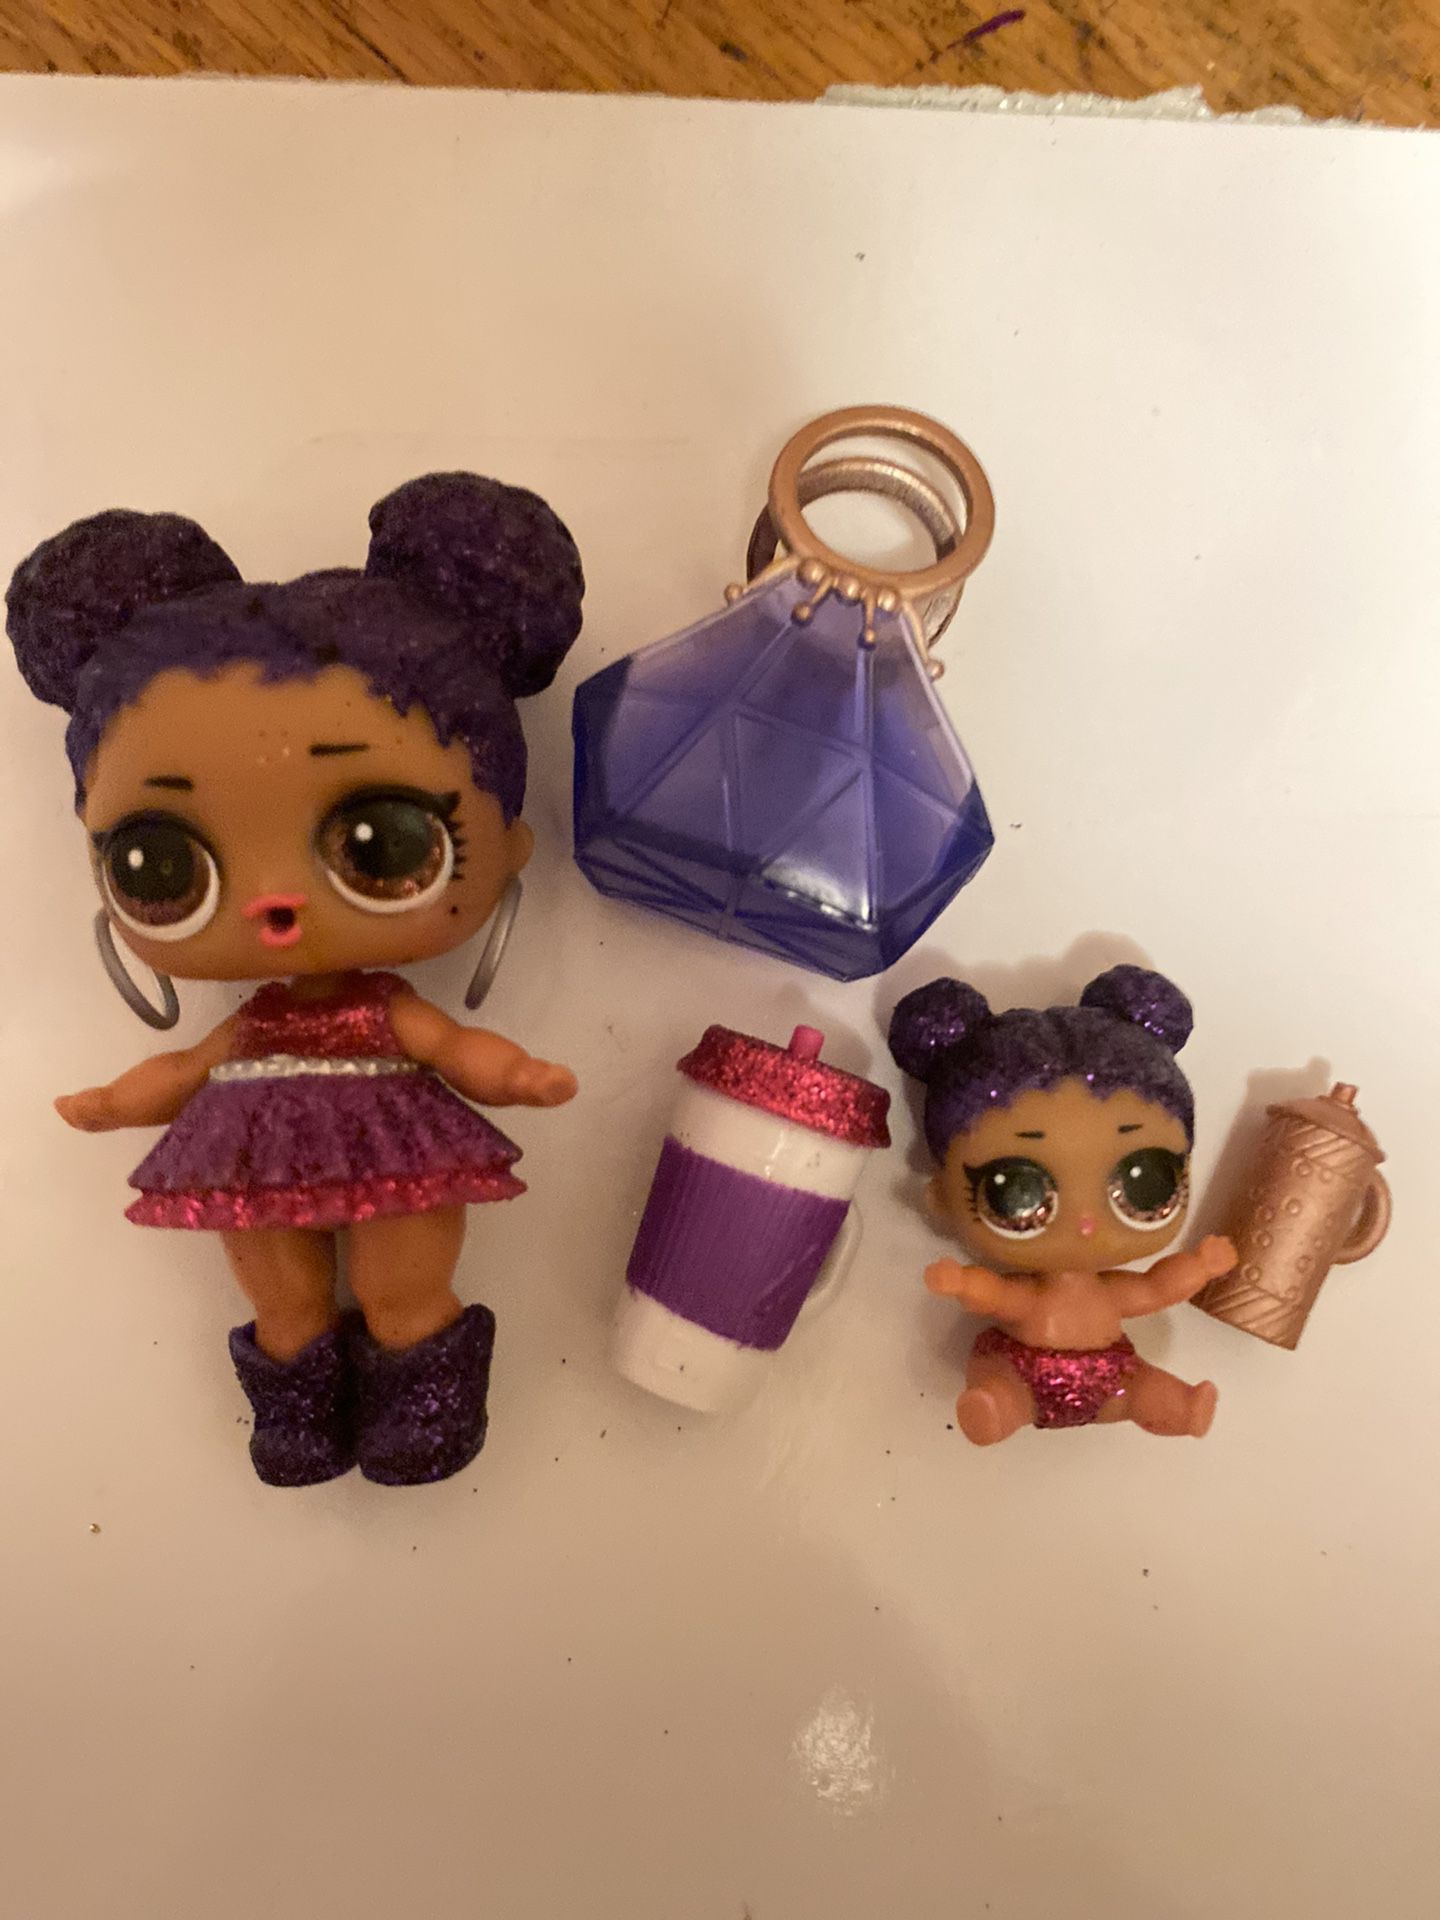 Lol Dolls “Purple Queen and lil sis”